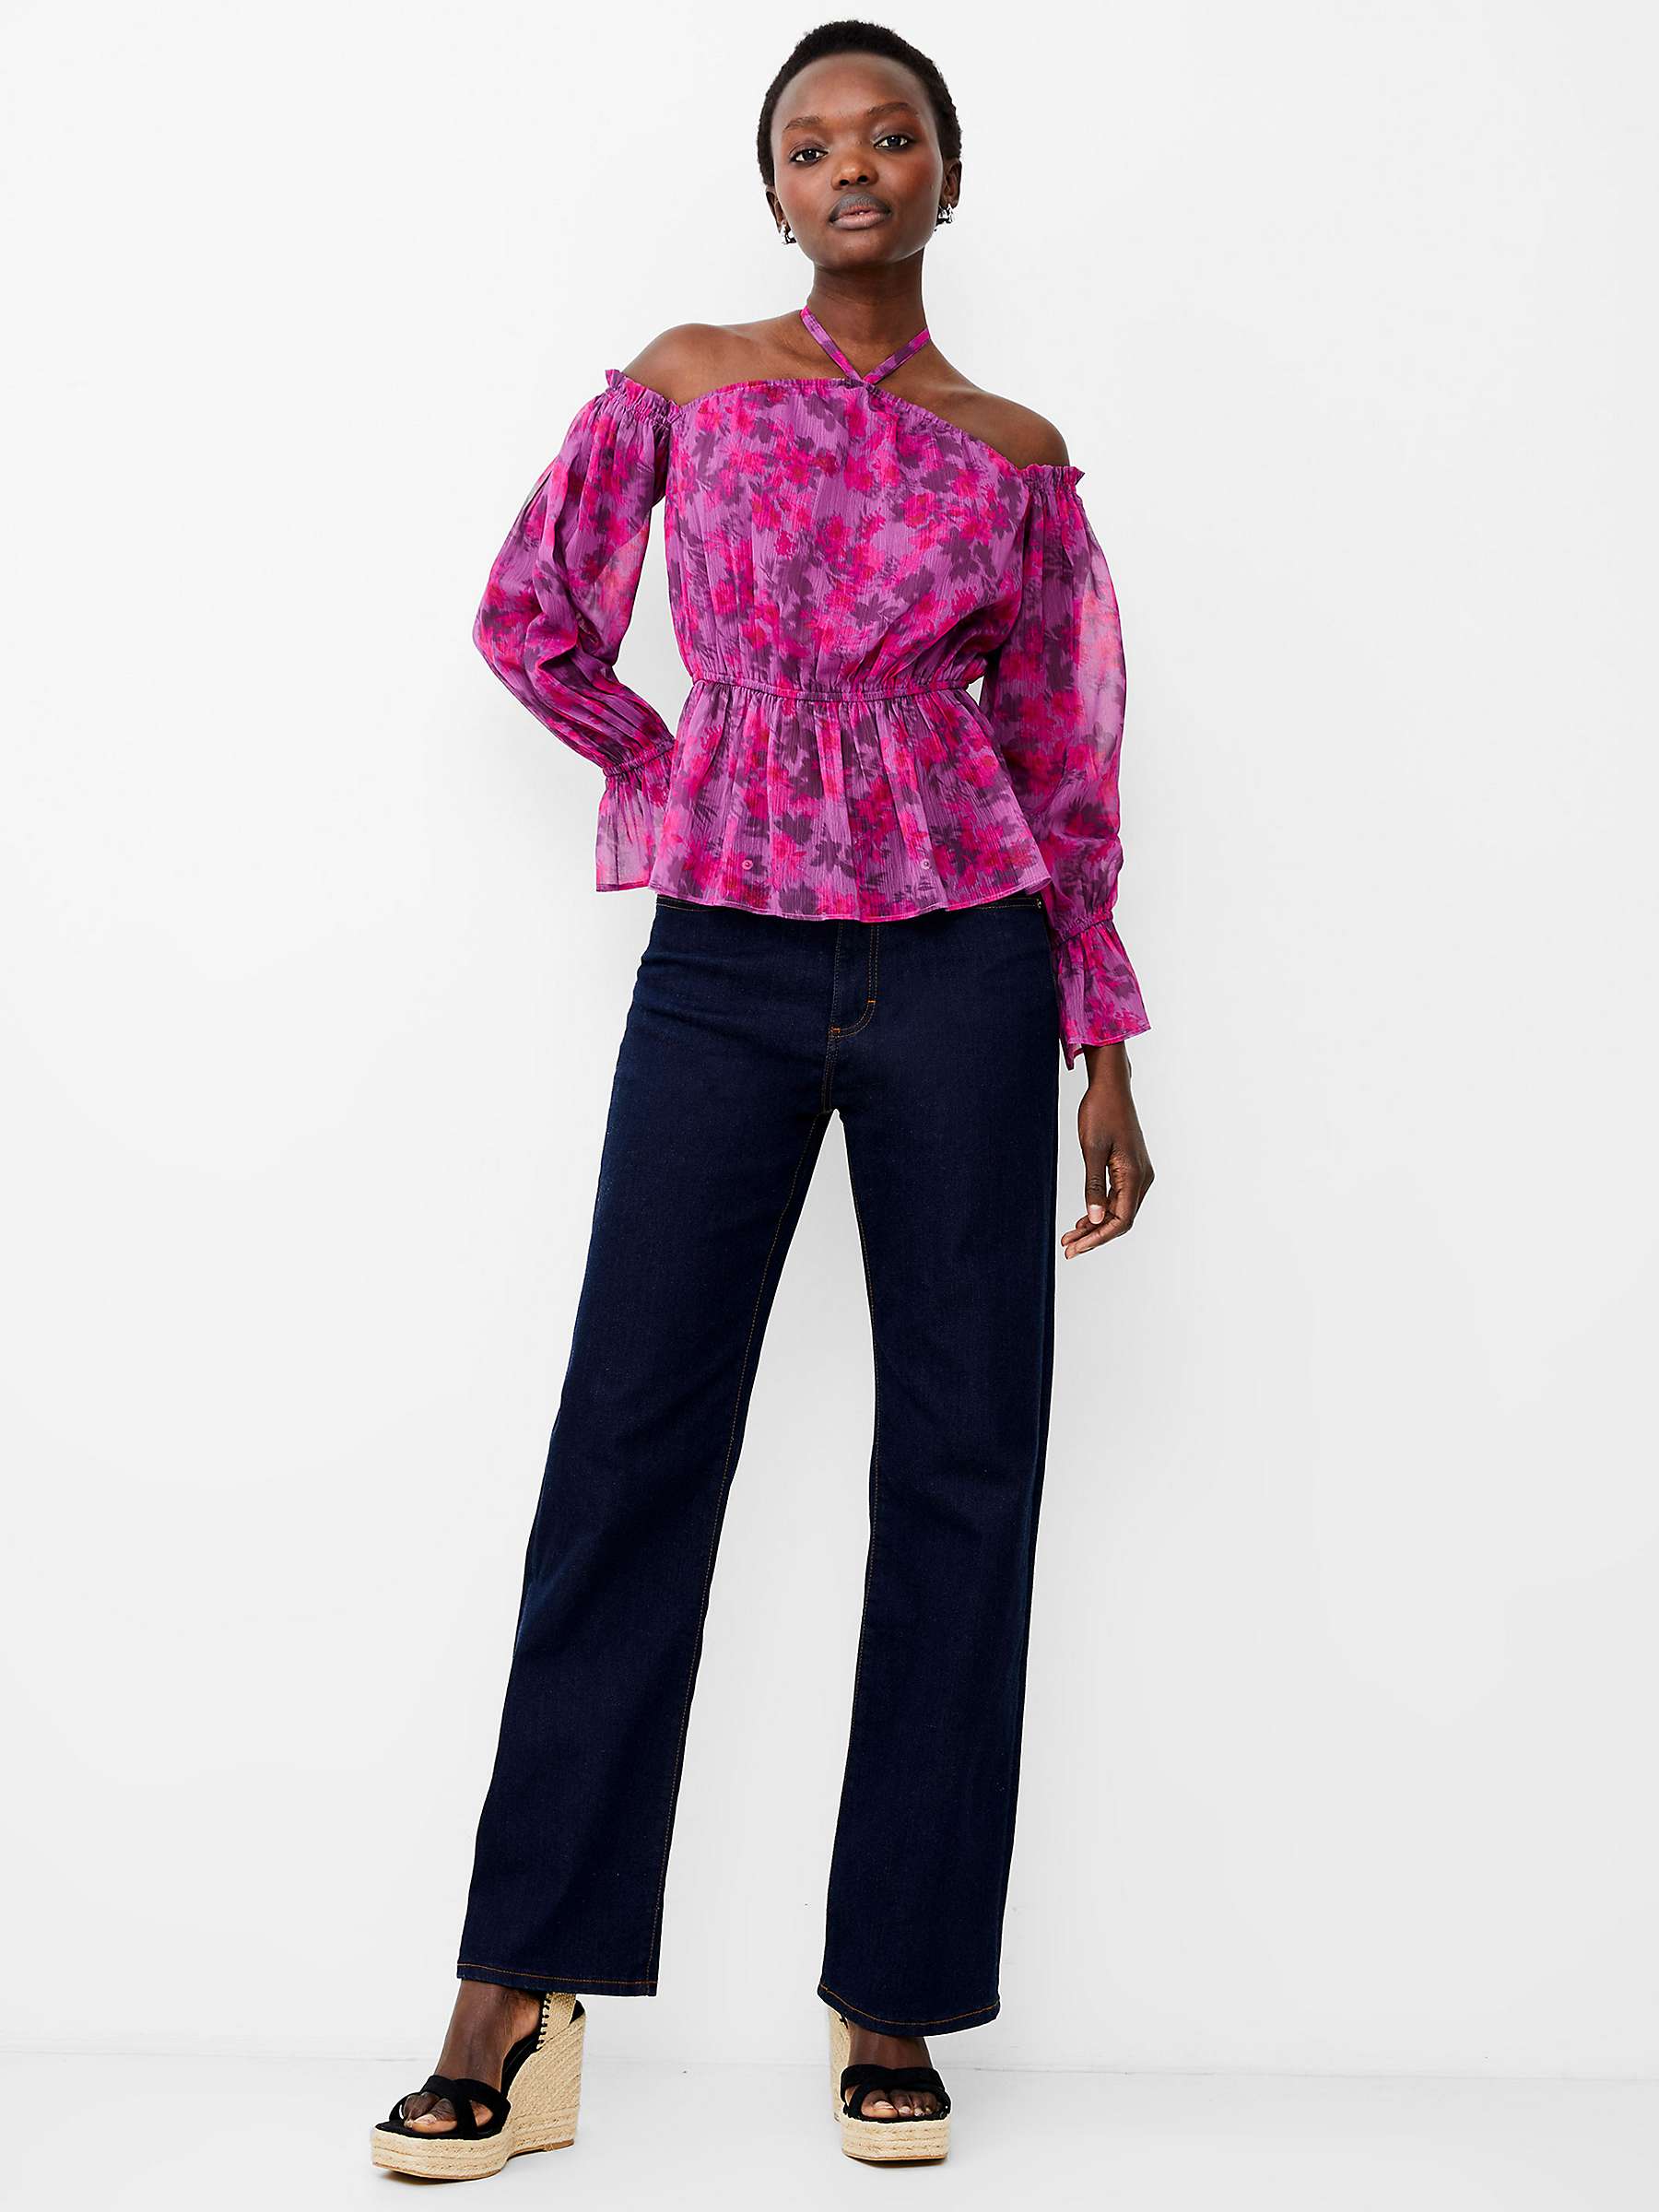 Buy French Connection Arla Hallie Crinkle Blouse, Meadow Mauve Online at johnlewis.com